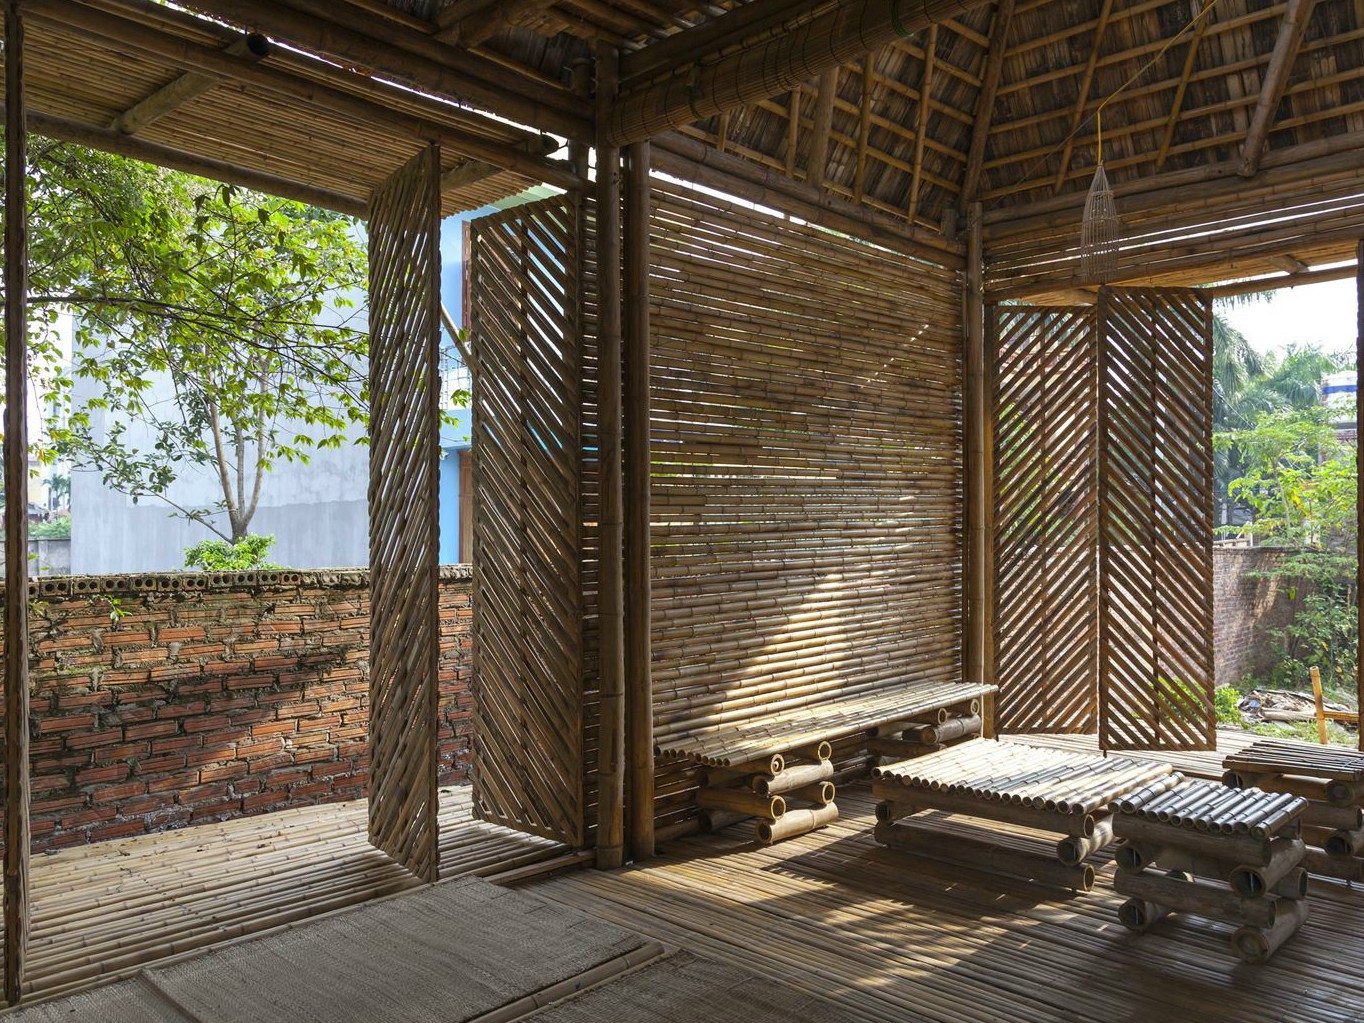 Bamboo House - Type of Bamboo